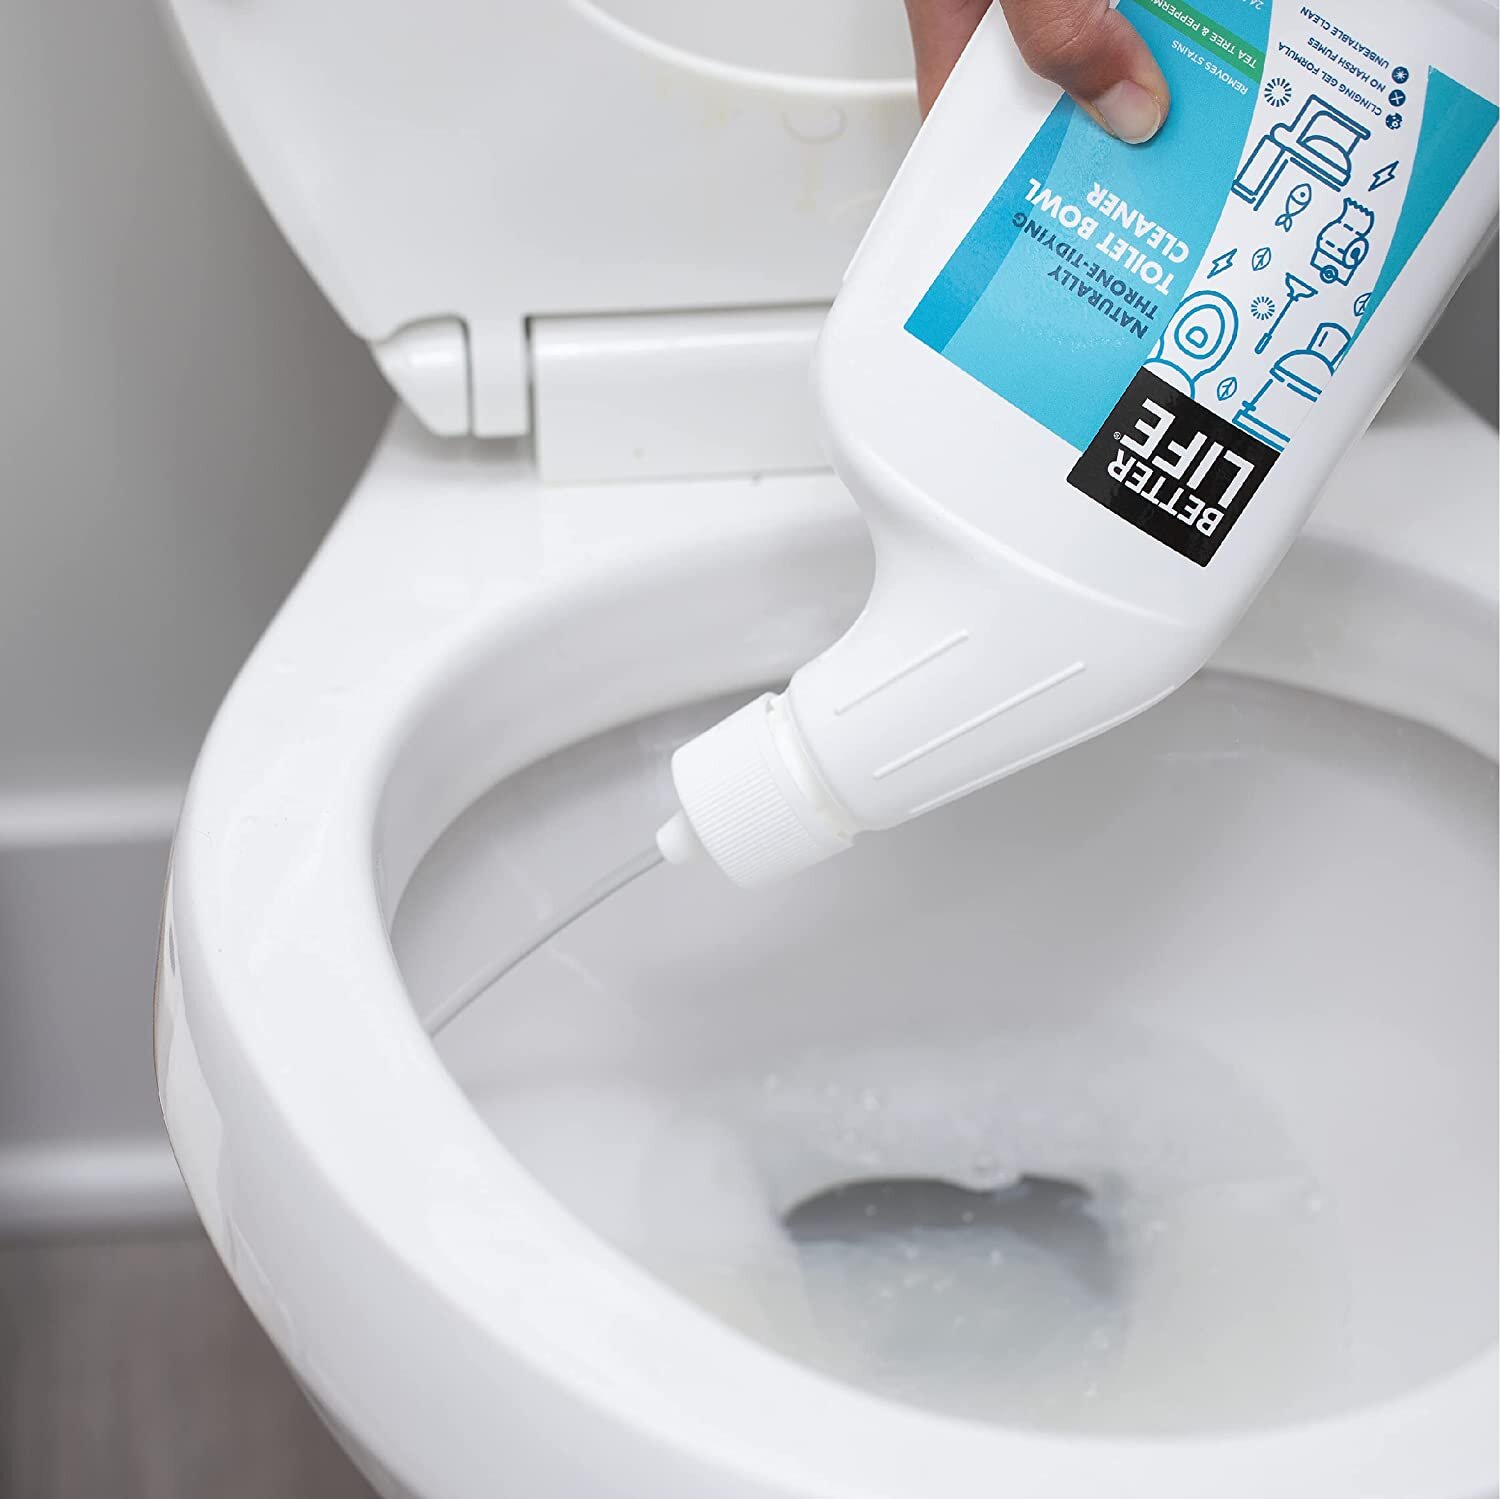 What Is In Toilet Bowl Cleaner